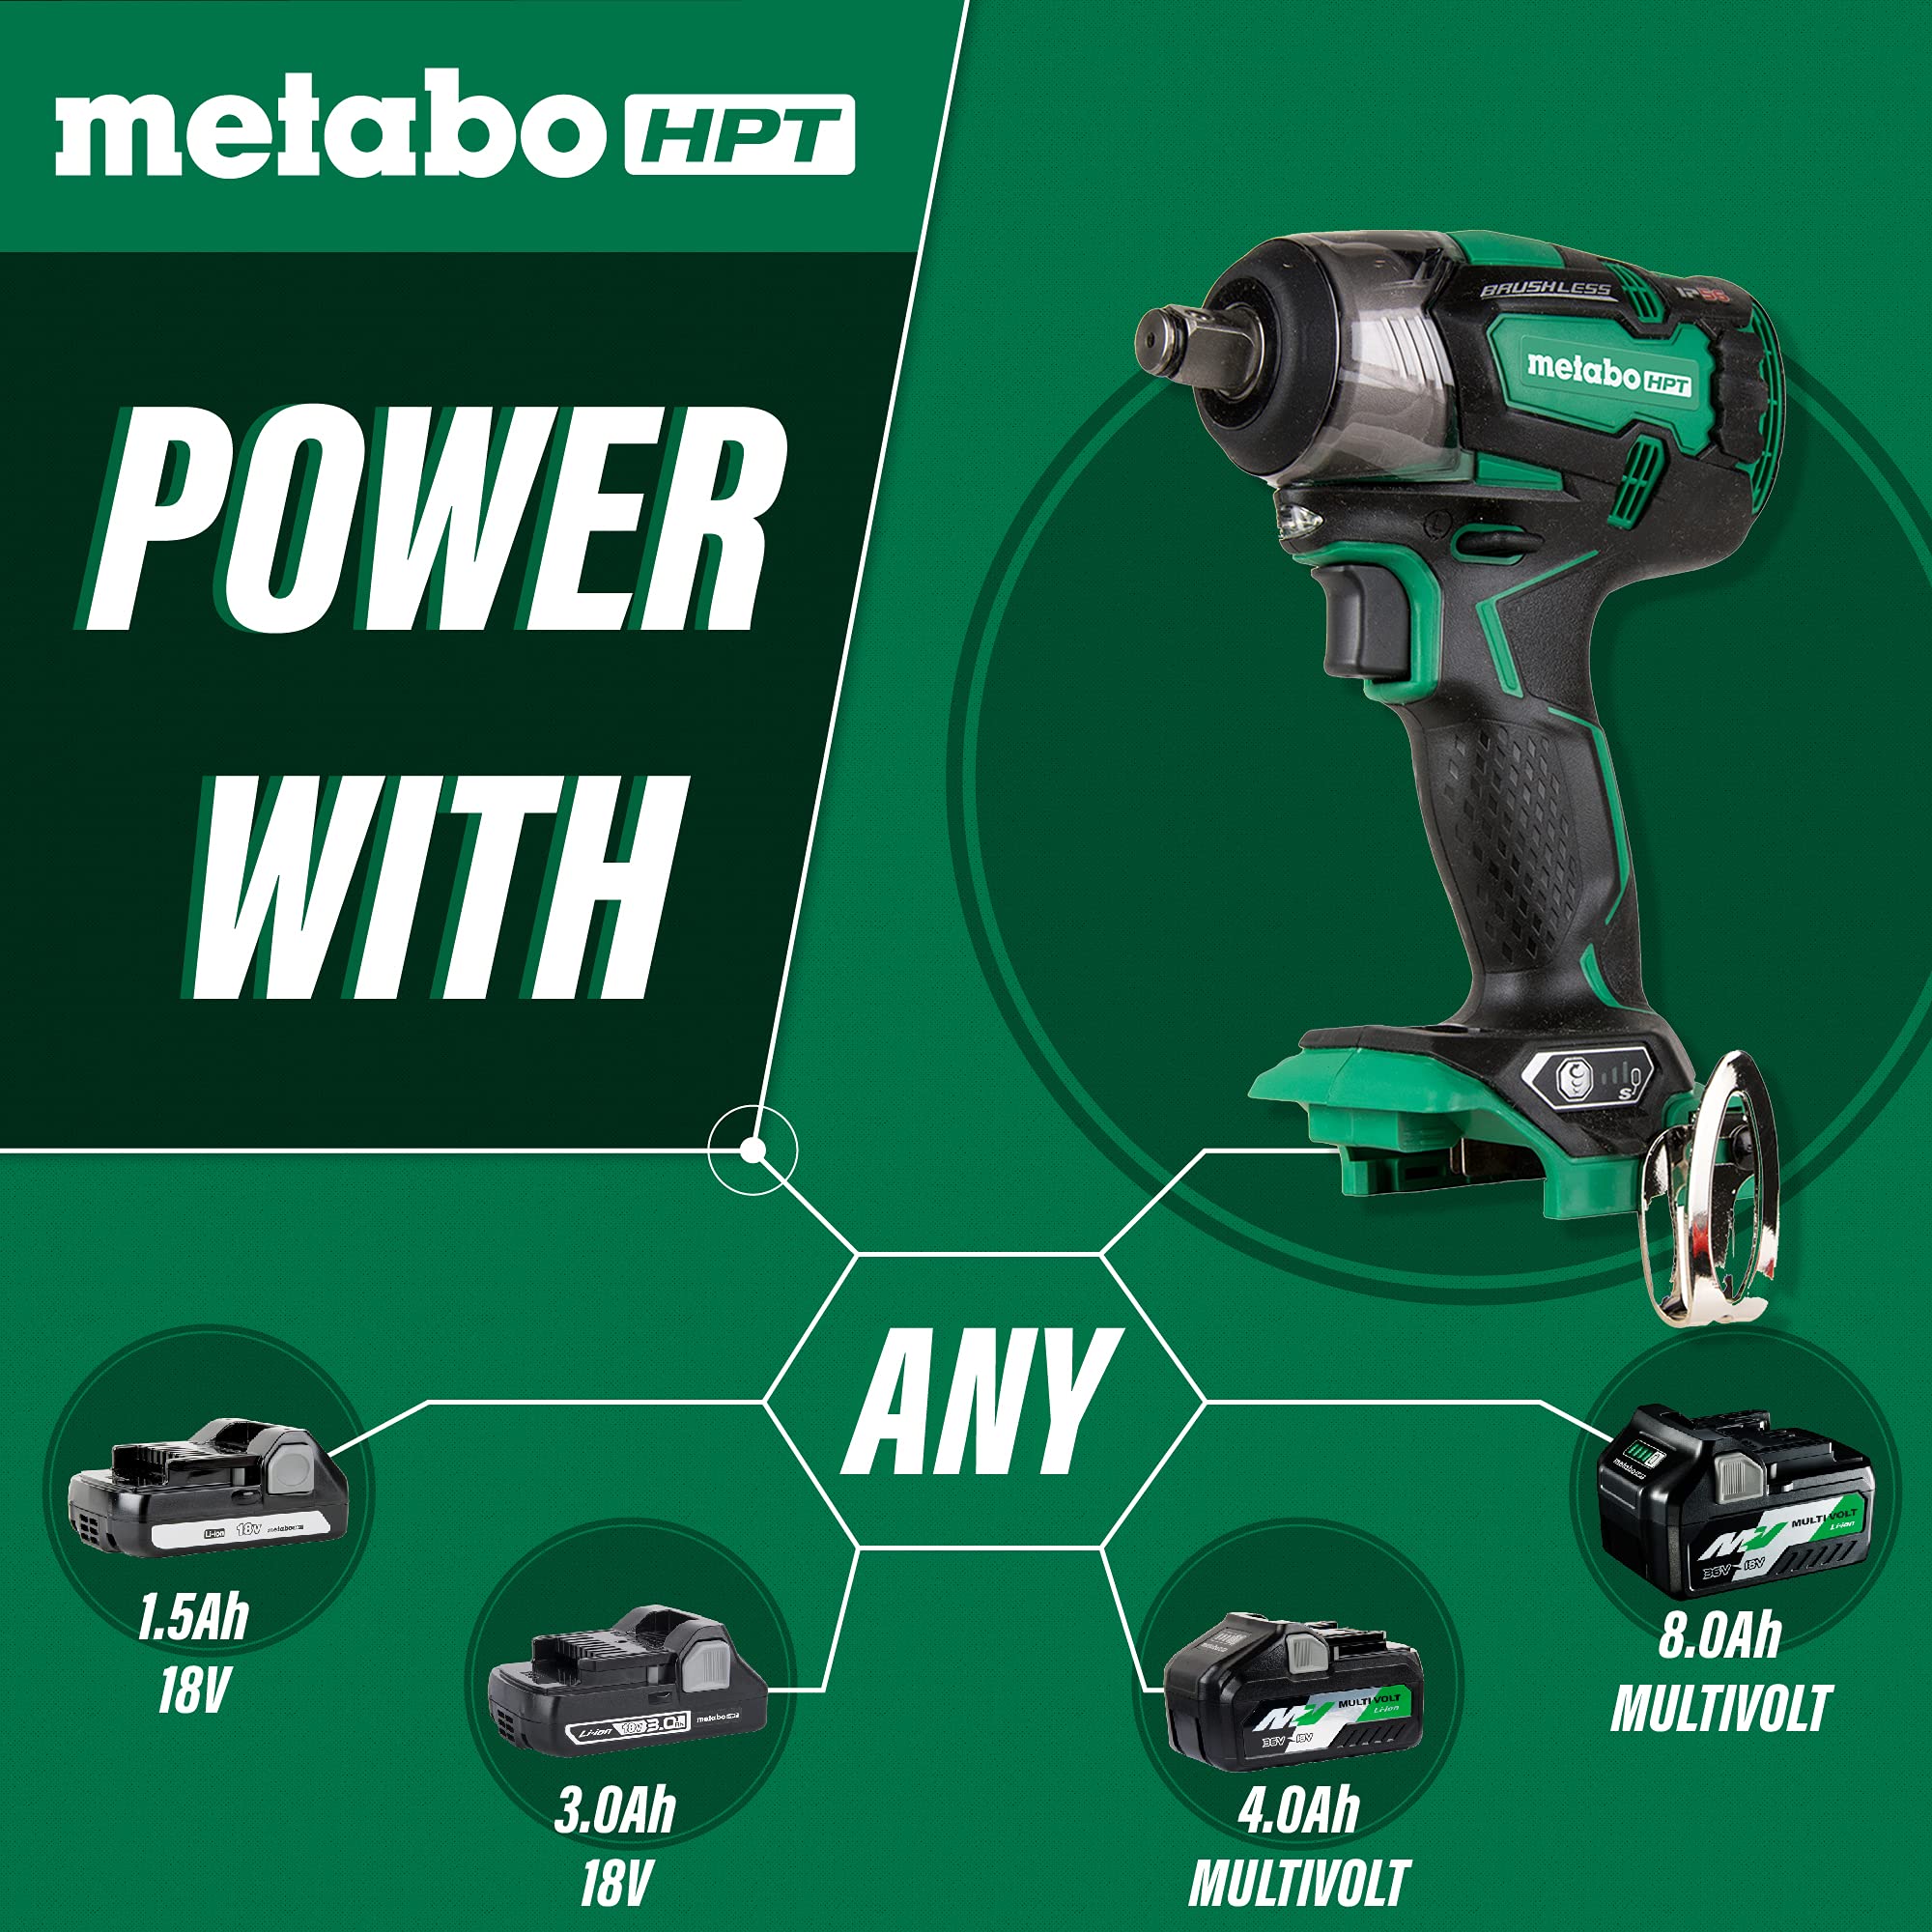 Metabo HPT 18V Cordless Impact Wrench | 225'-LBS of Torque | 1/2" Square Drive | IP56 Compliant | LED Light | 4-Stage Electronic Speed Switch | Brushless | Tool Only - No Battery | WR18DBDL2Q4